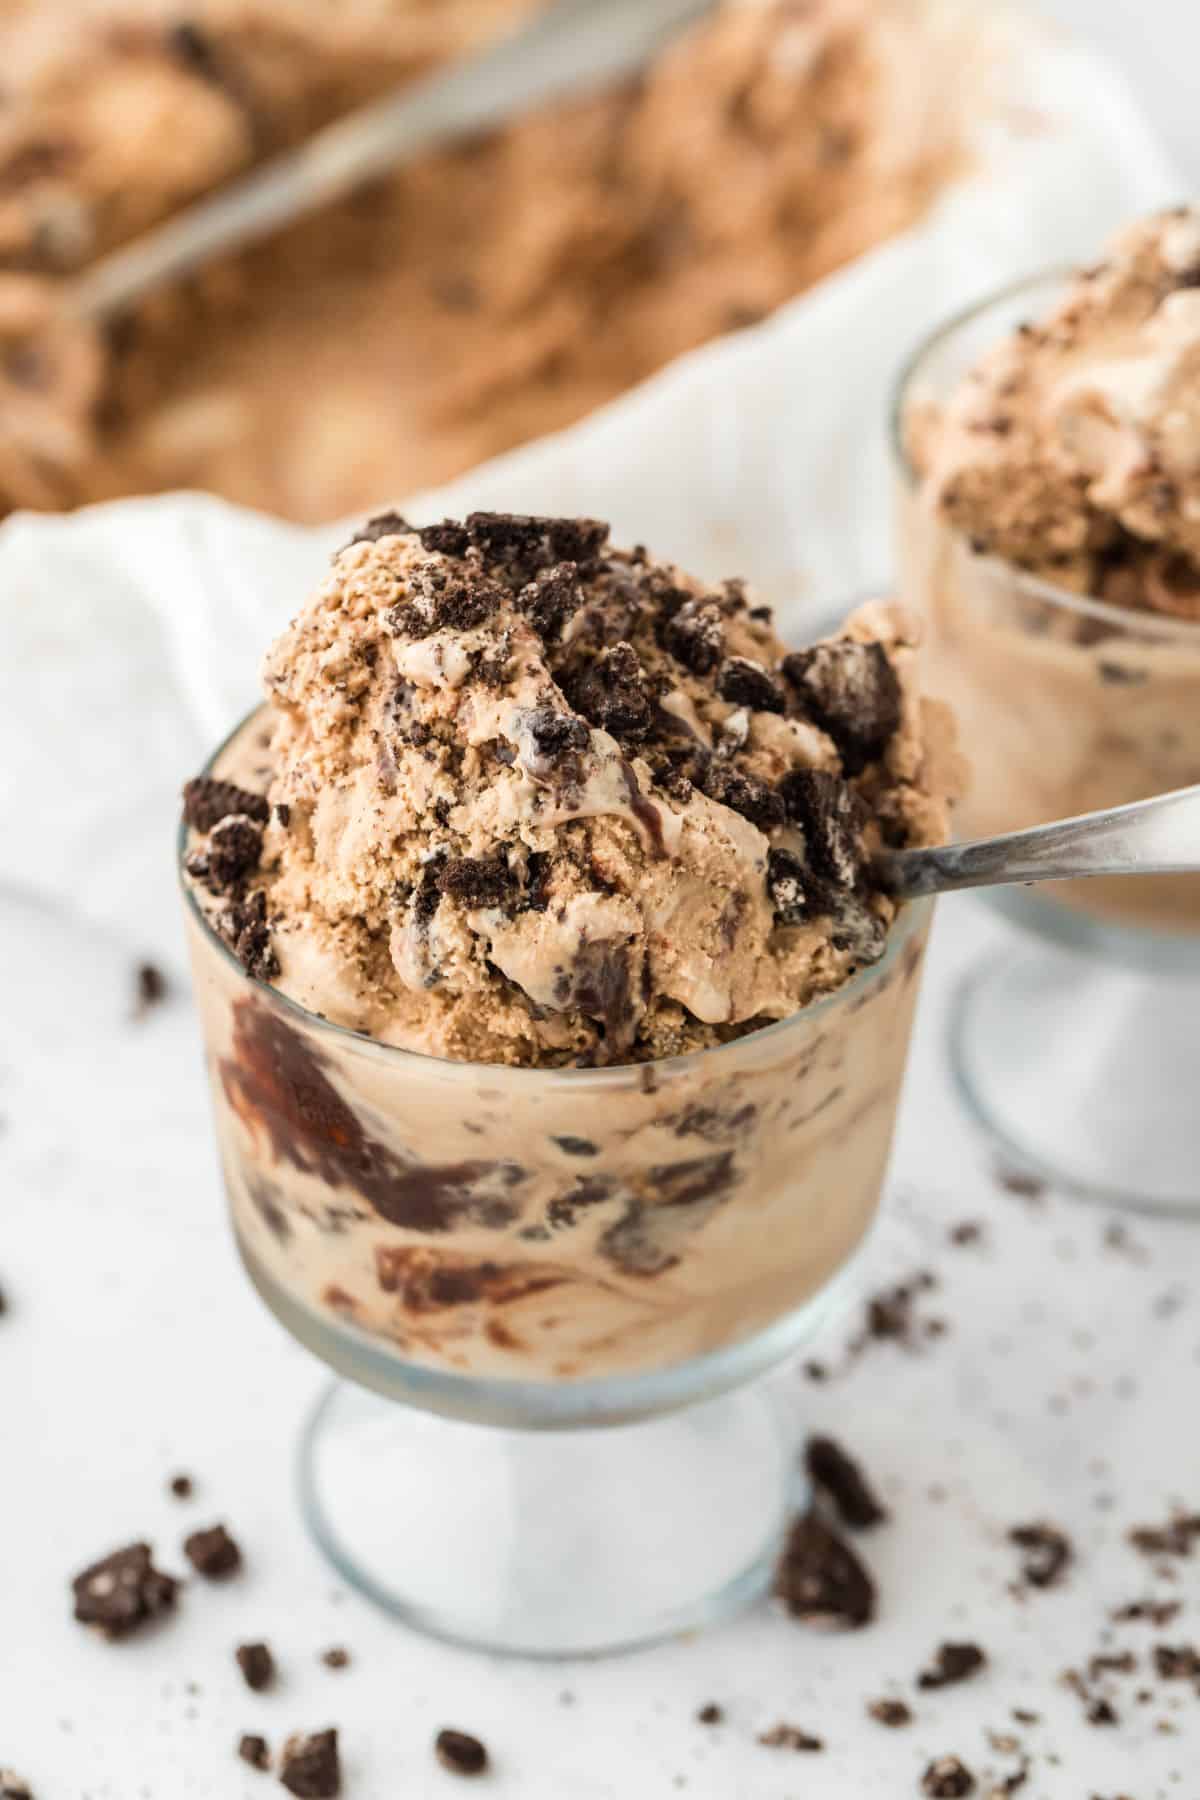 A glass dish of mocha fudge ice cream on a table with a spoon in the glass and cookies scattered on the table.